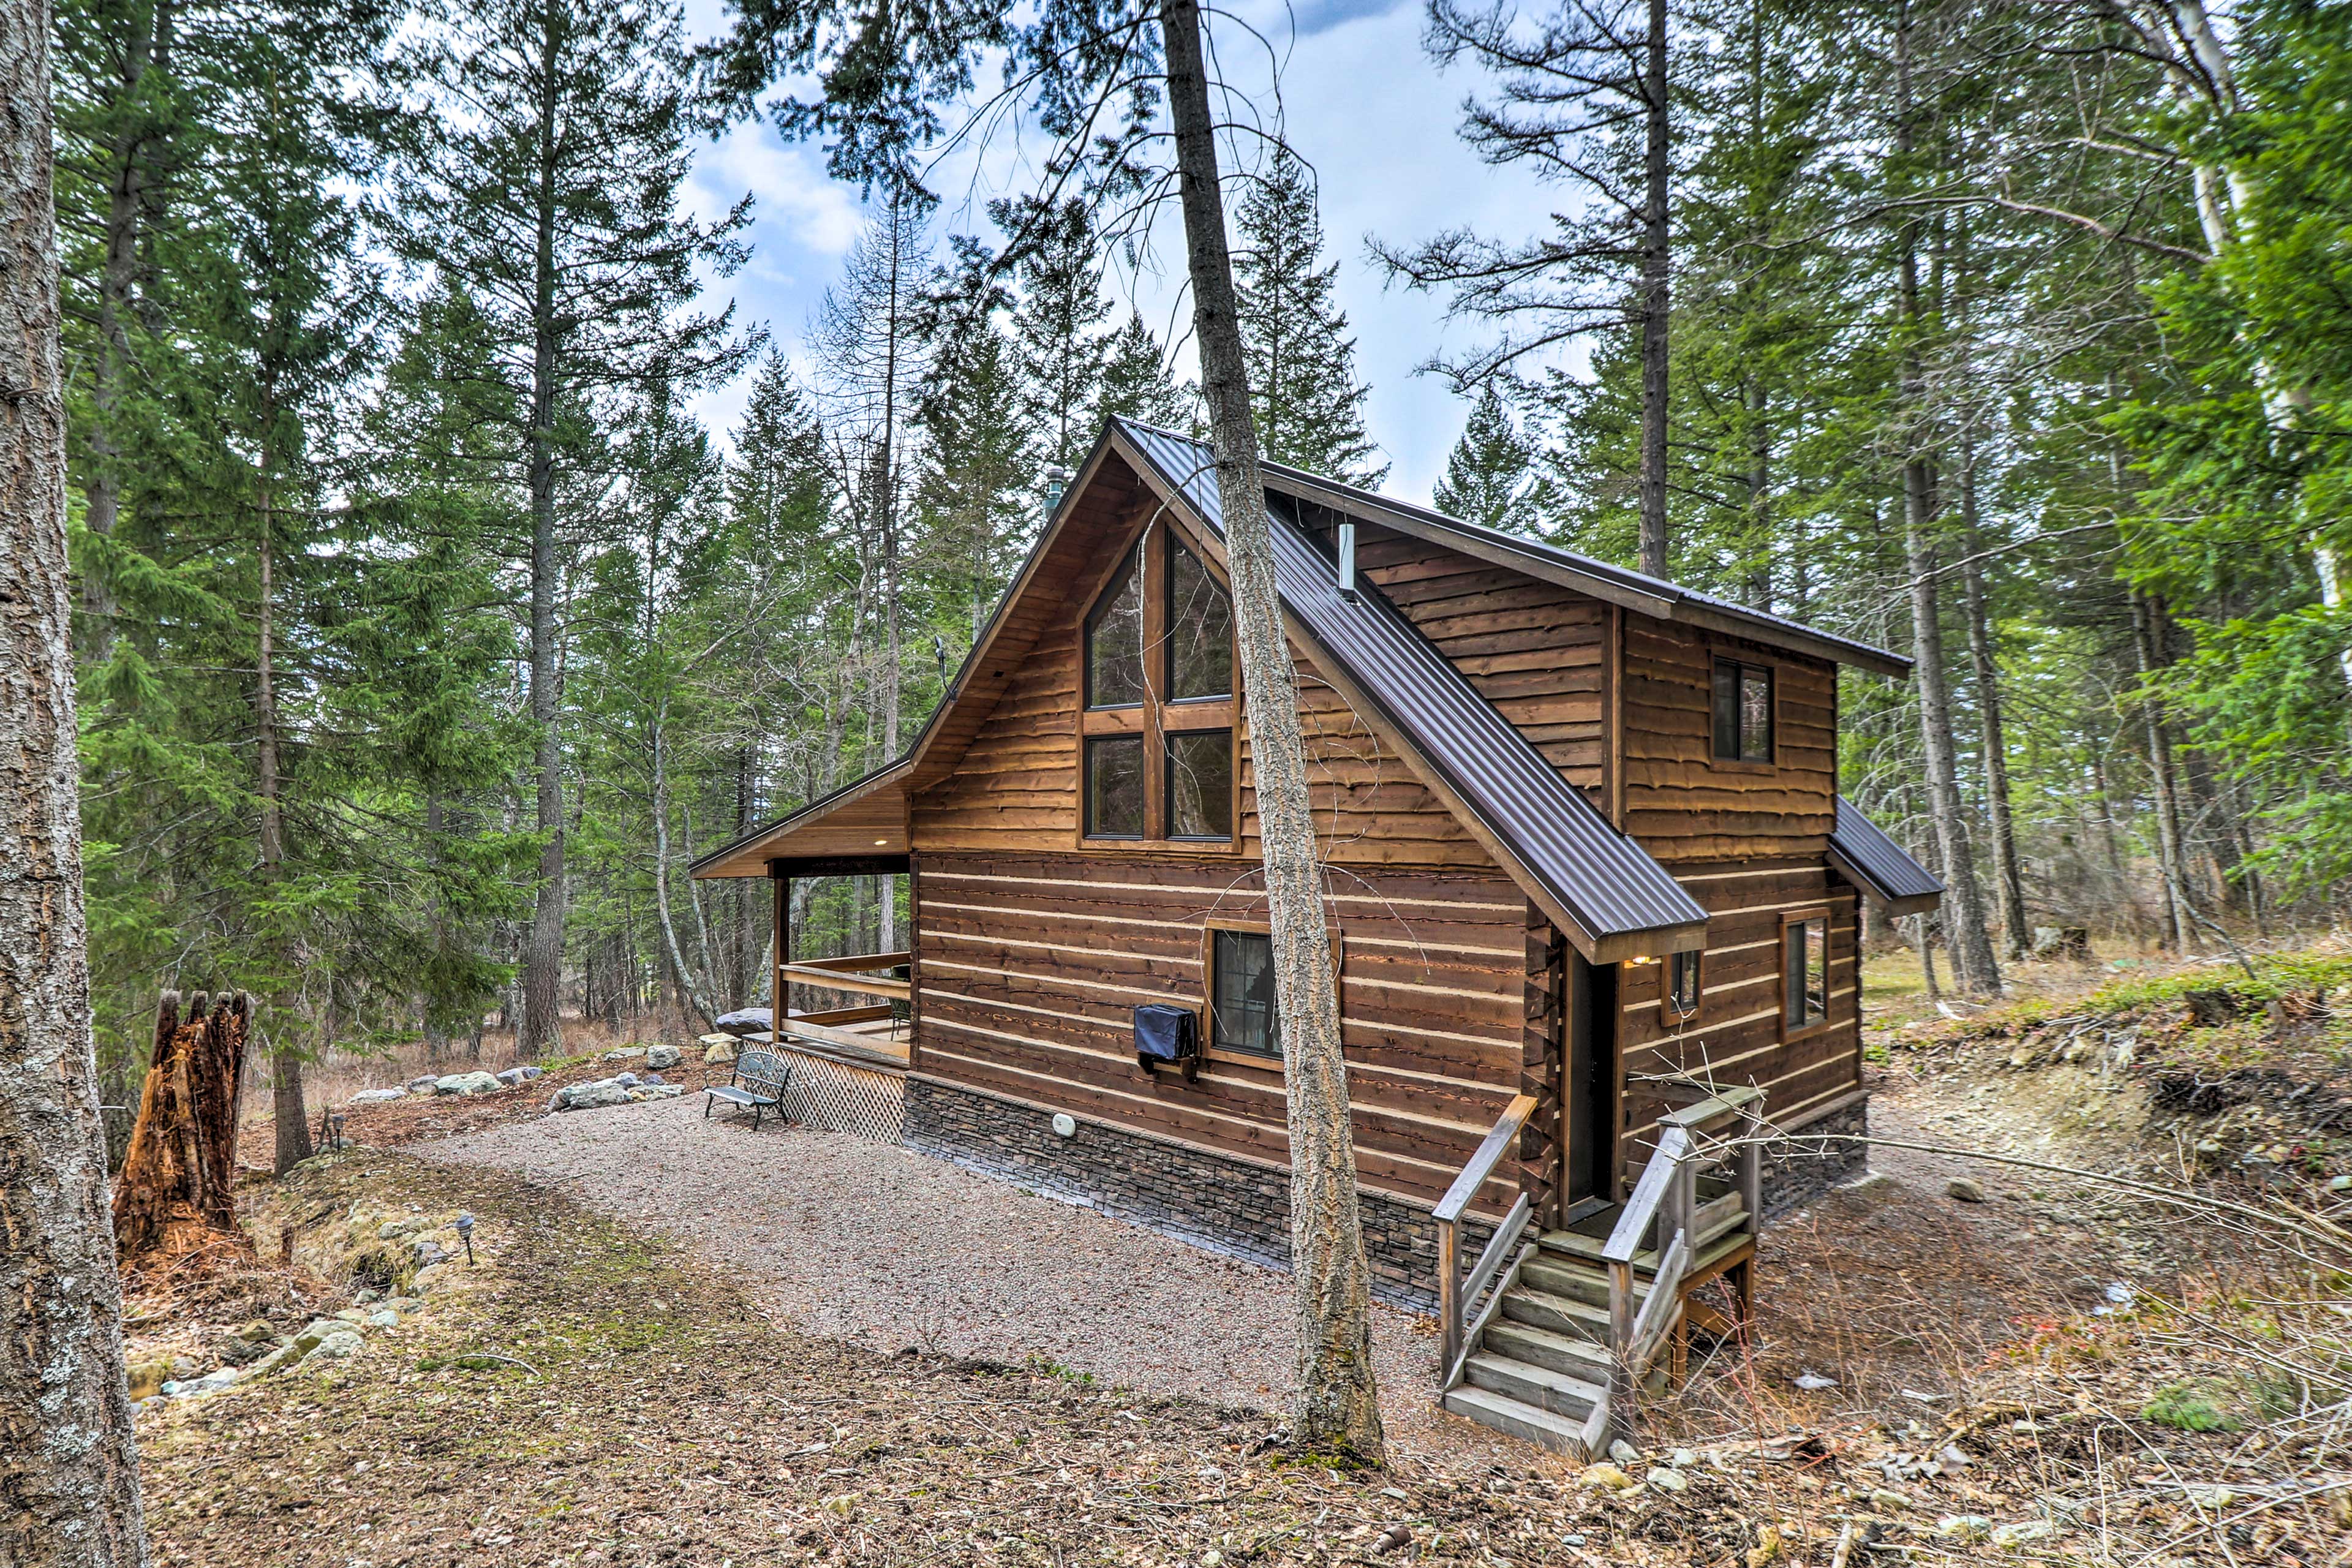 Reconnect with Nature at ‘Timber Creek’ Cabin!